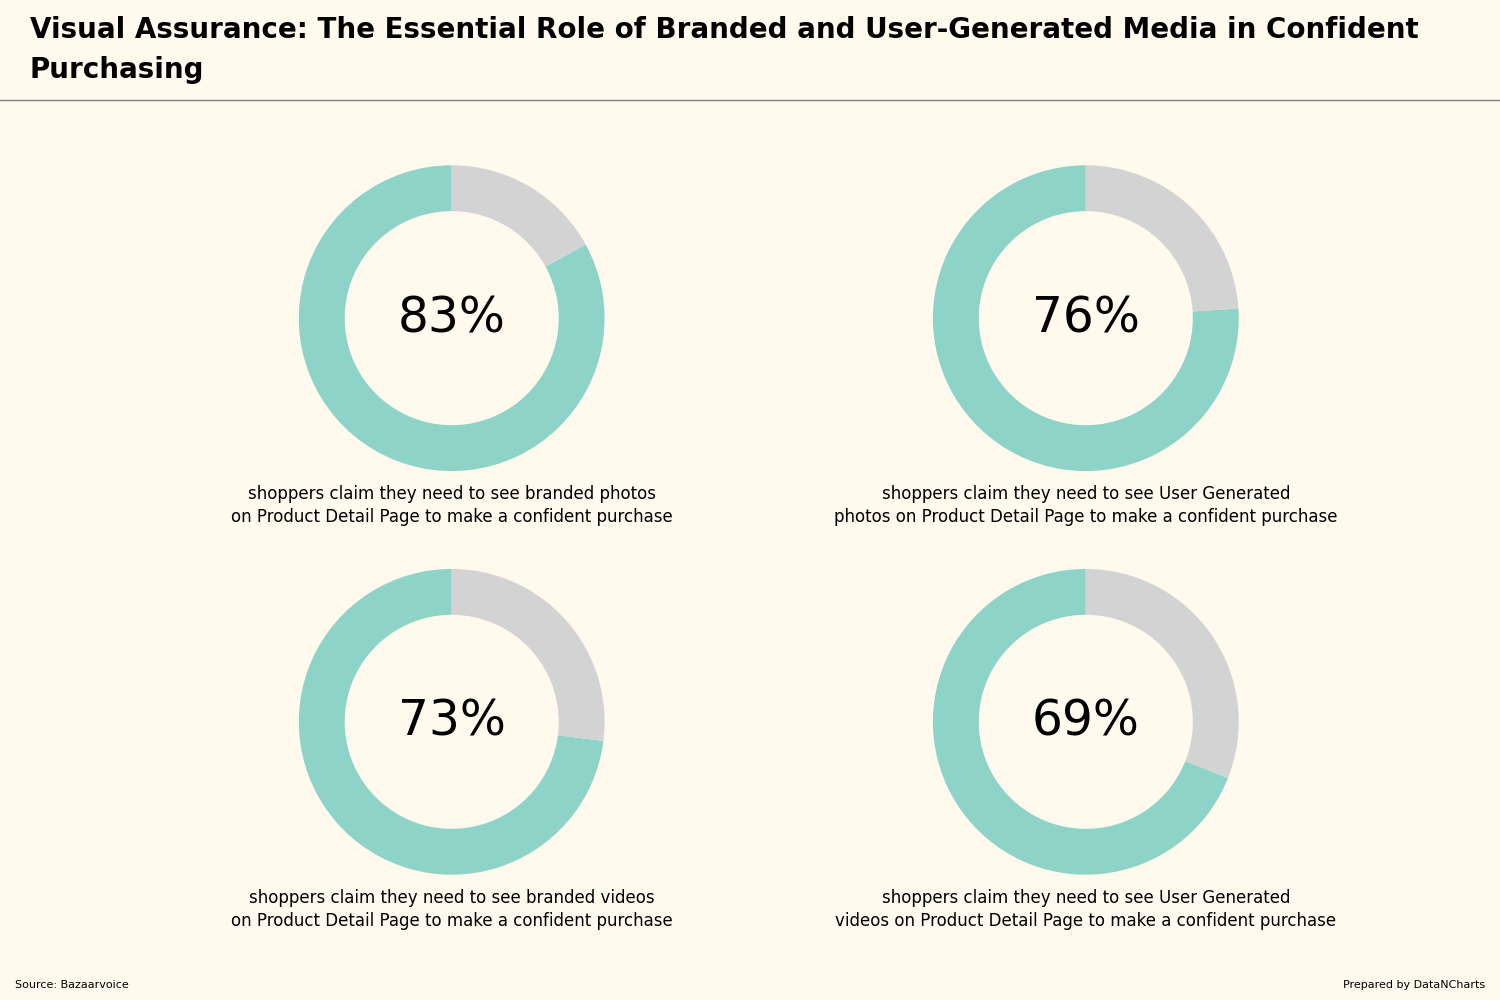 Visual Assurance The Essential Role of Branded and User-Generated Media in Confident Purchasing